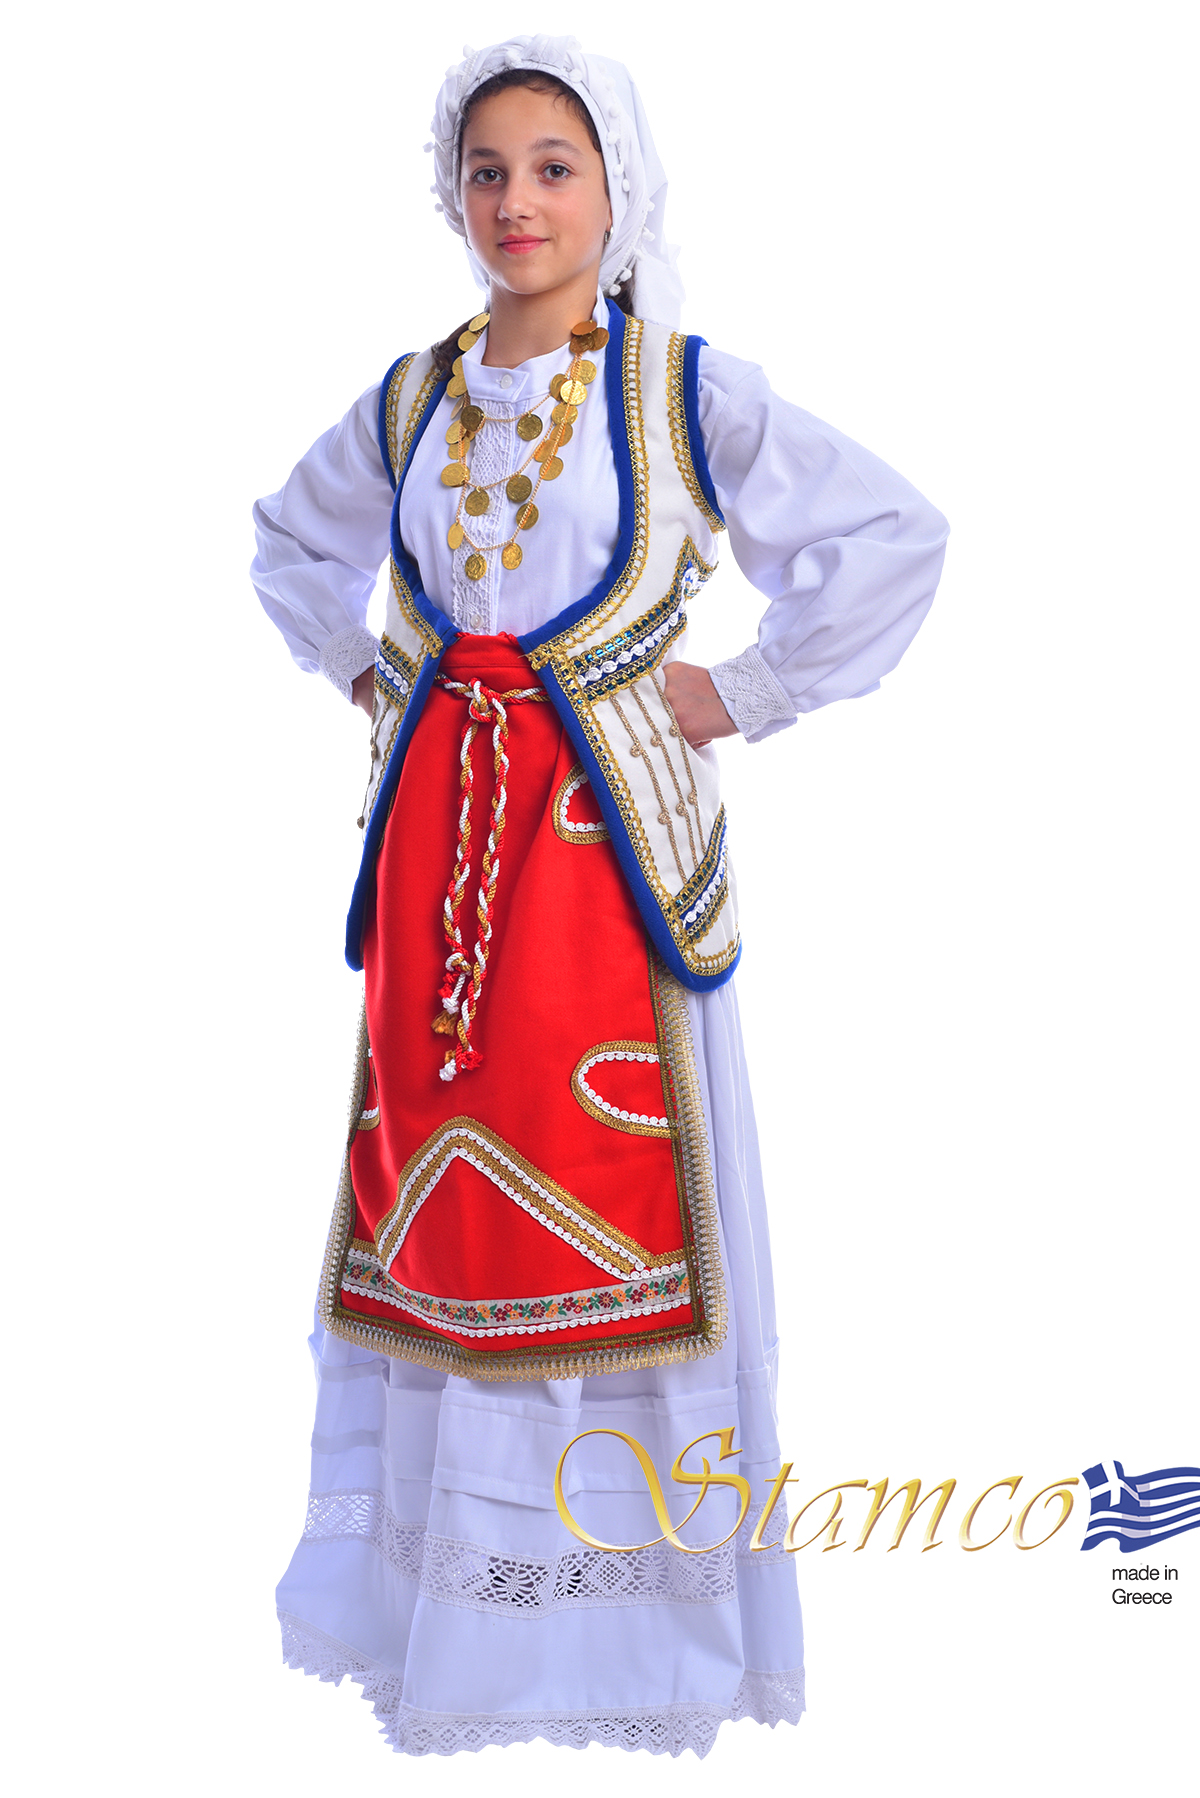 Female Greece National Costume | peacecommission.kdsg.gov.ng